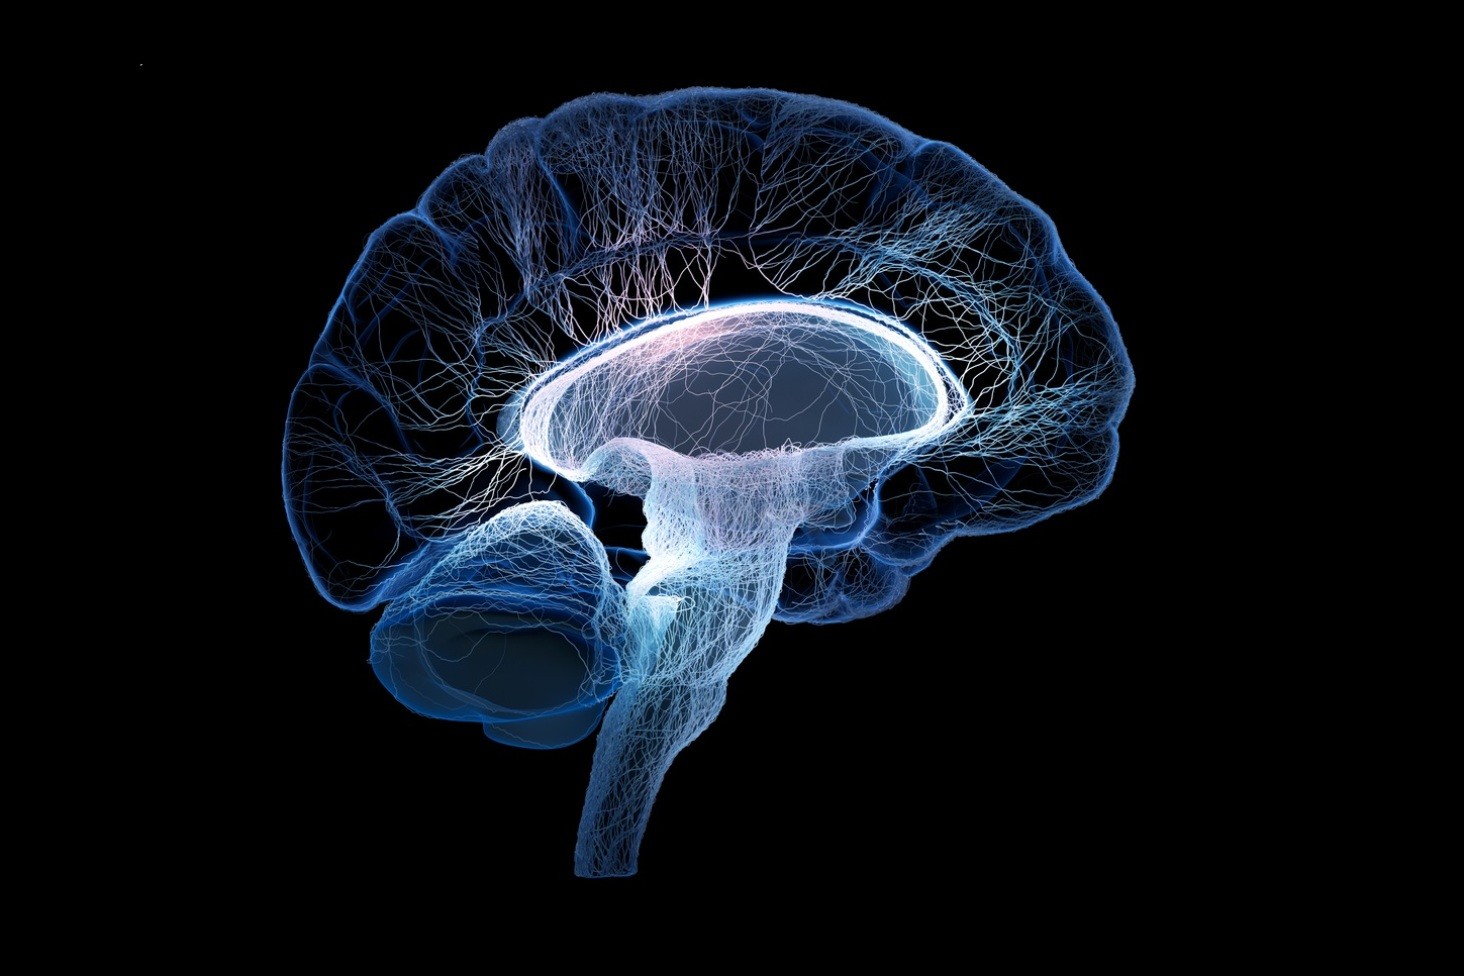 Mri Brain Scan Of Children With Tourettes Syndrome May Provide Clues